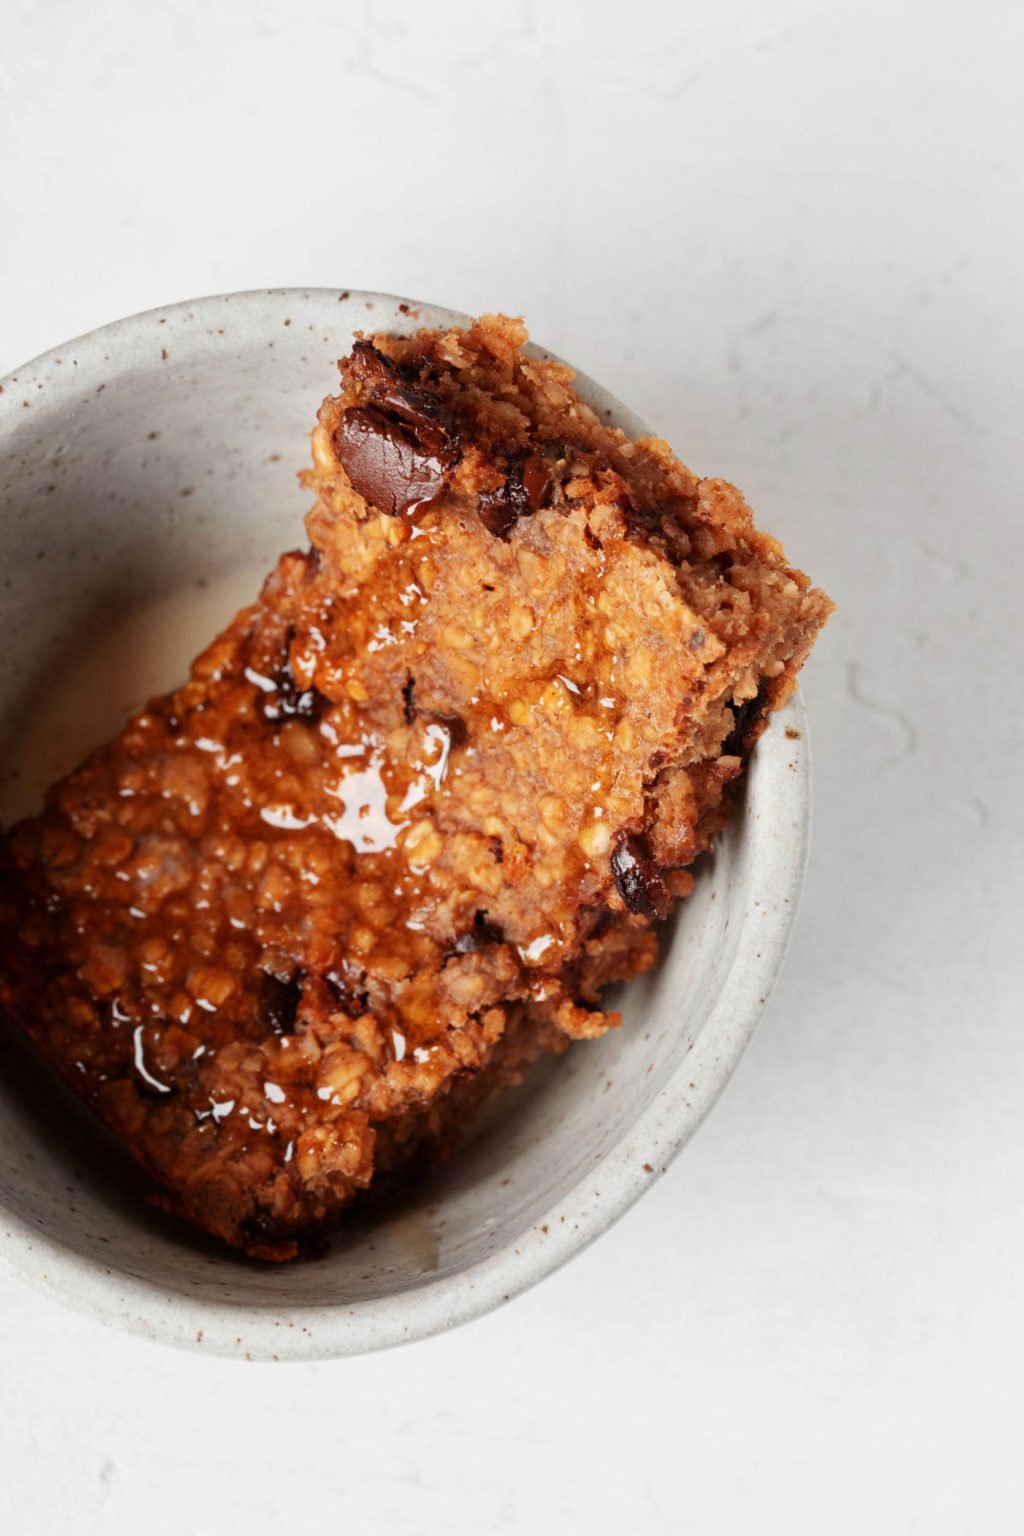 A small, ceramic bowl holds a slice of vegan pumpkin chocolate chip baked oatmeal, which is drizzled with maple syrup.